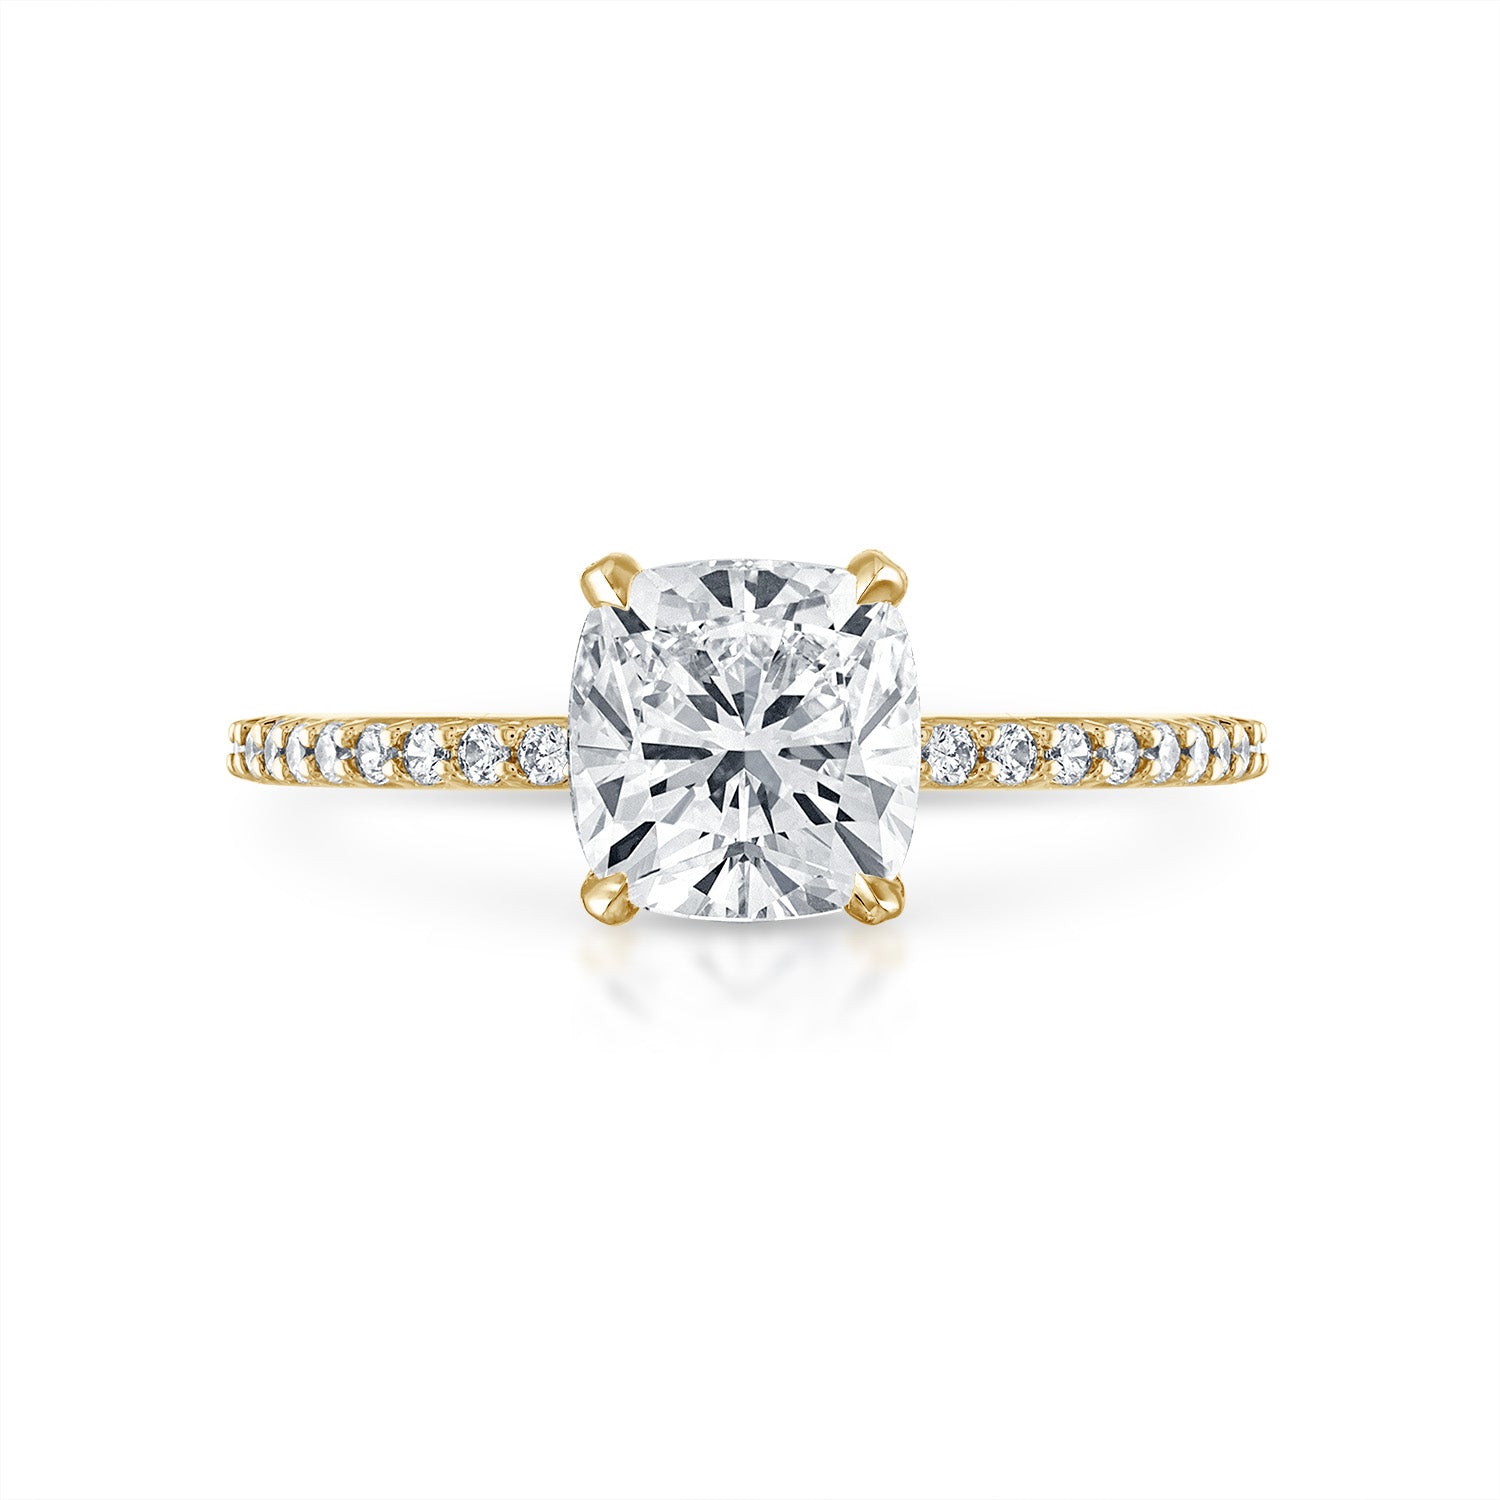 Cushion Pave with Pave Underbezel Engagement Ring in Yellow Gold